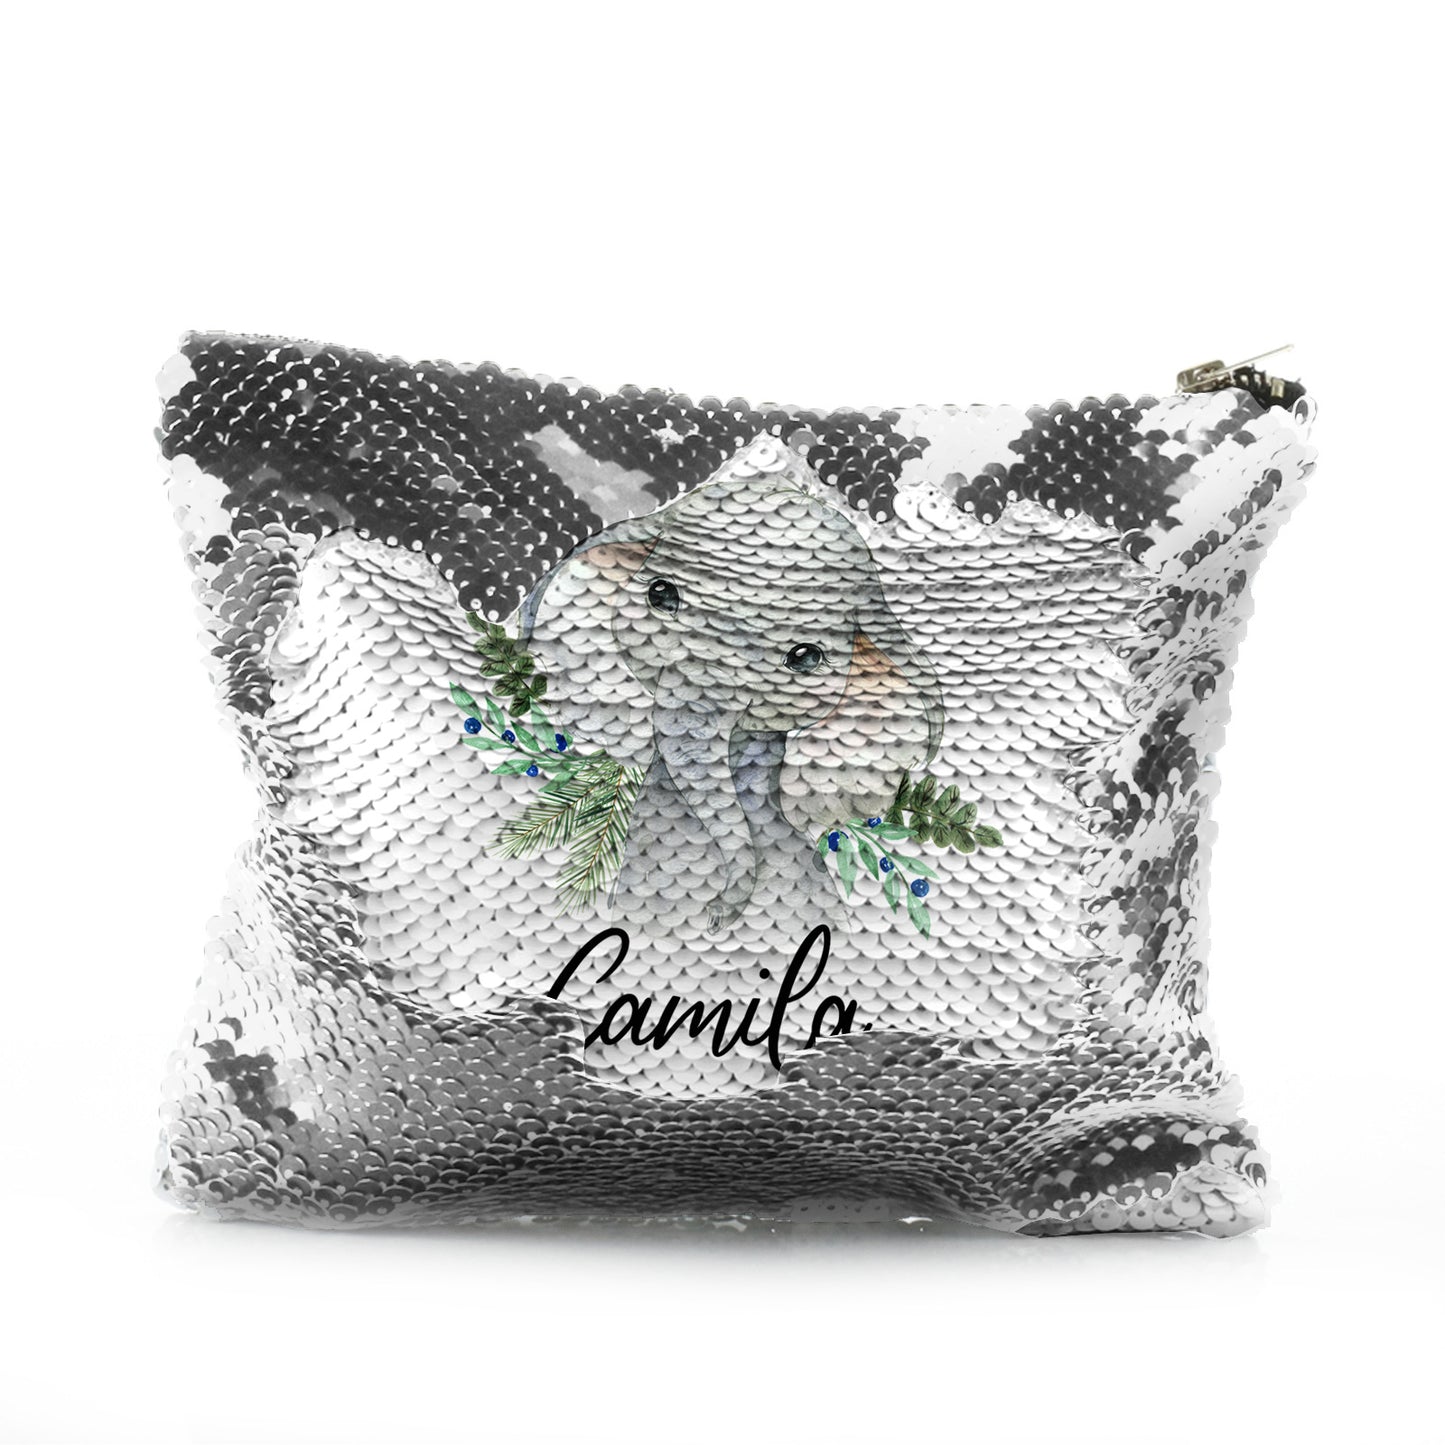 Personalised Sequin Zip Bag with Elephant Blue Berries and Cute Text